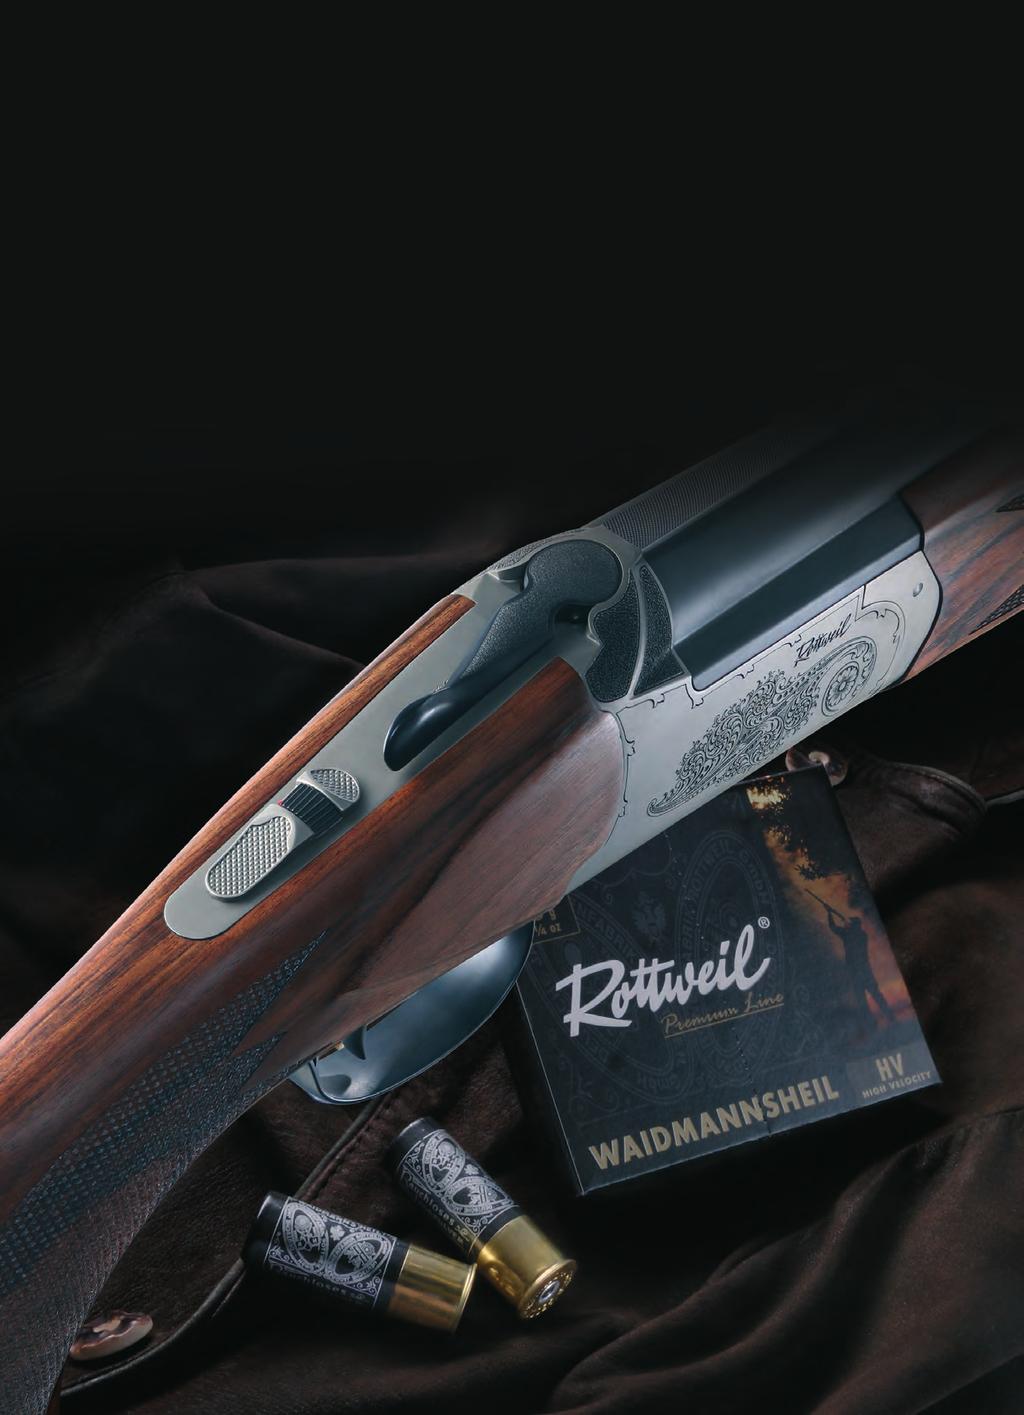 78 AMMUNITION ROTTWEIL 79 ROTTWEIL PREMIUM LINE We are driven by our high quality standards. We take great care to select only the finest quality components for our premium shot cartridges.